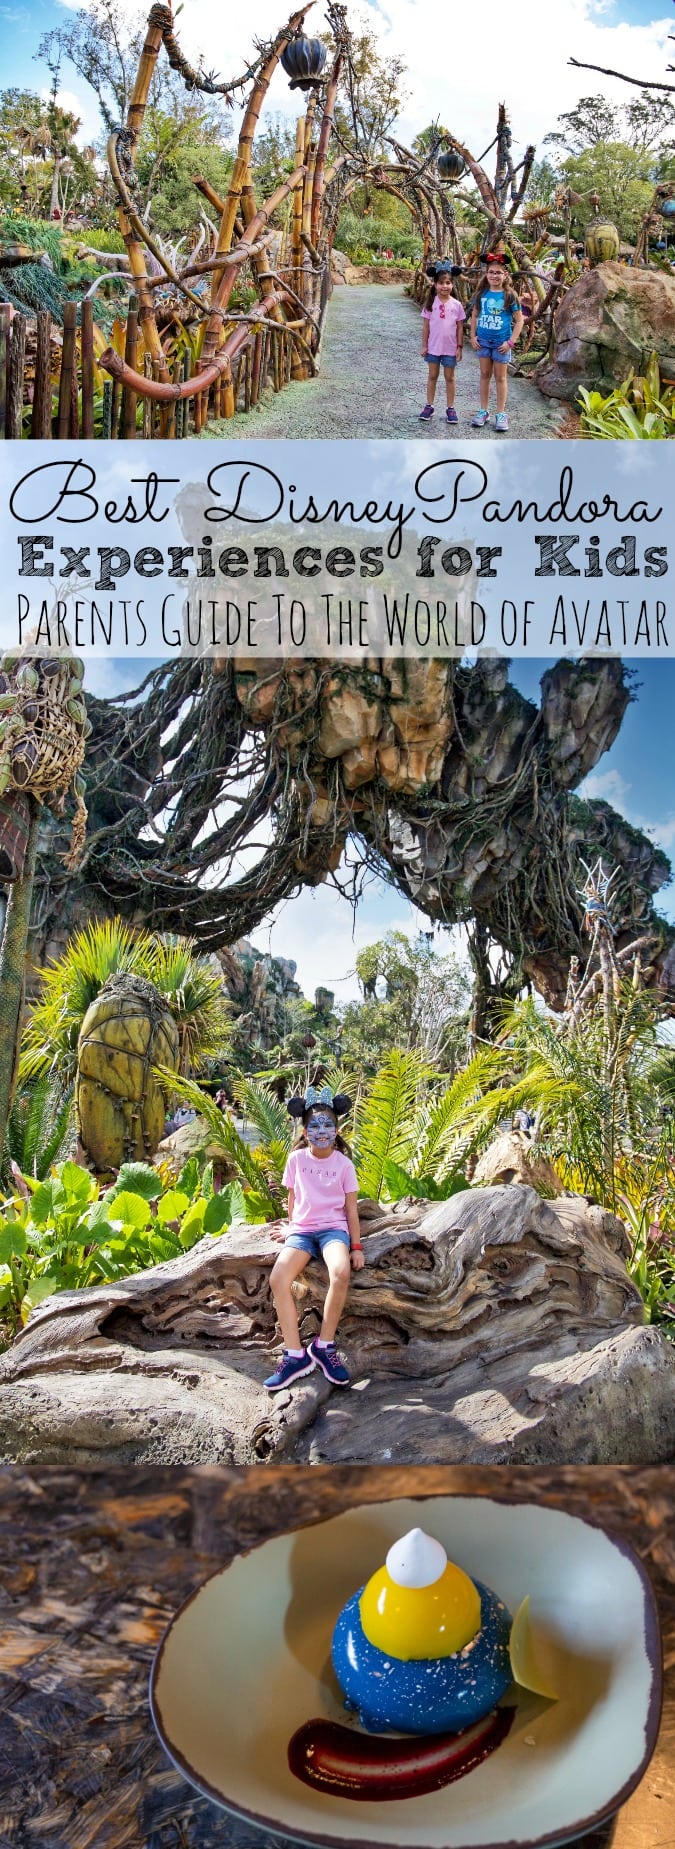 Best Disney Pandora Experiences For Kids | Parents Guide To The World of Avatar - simplytodaylife.com